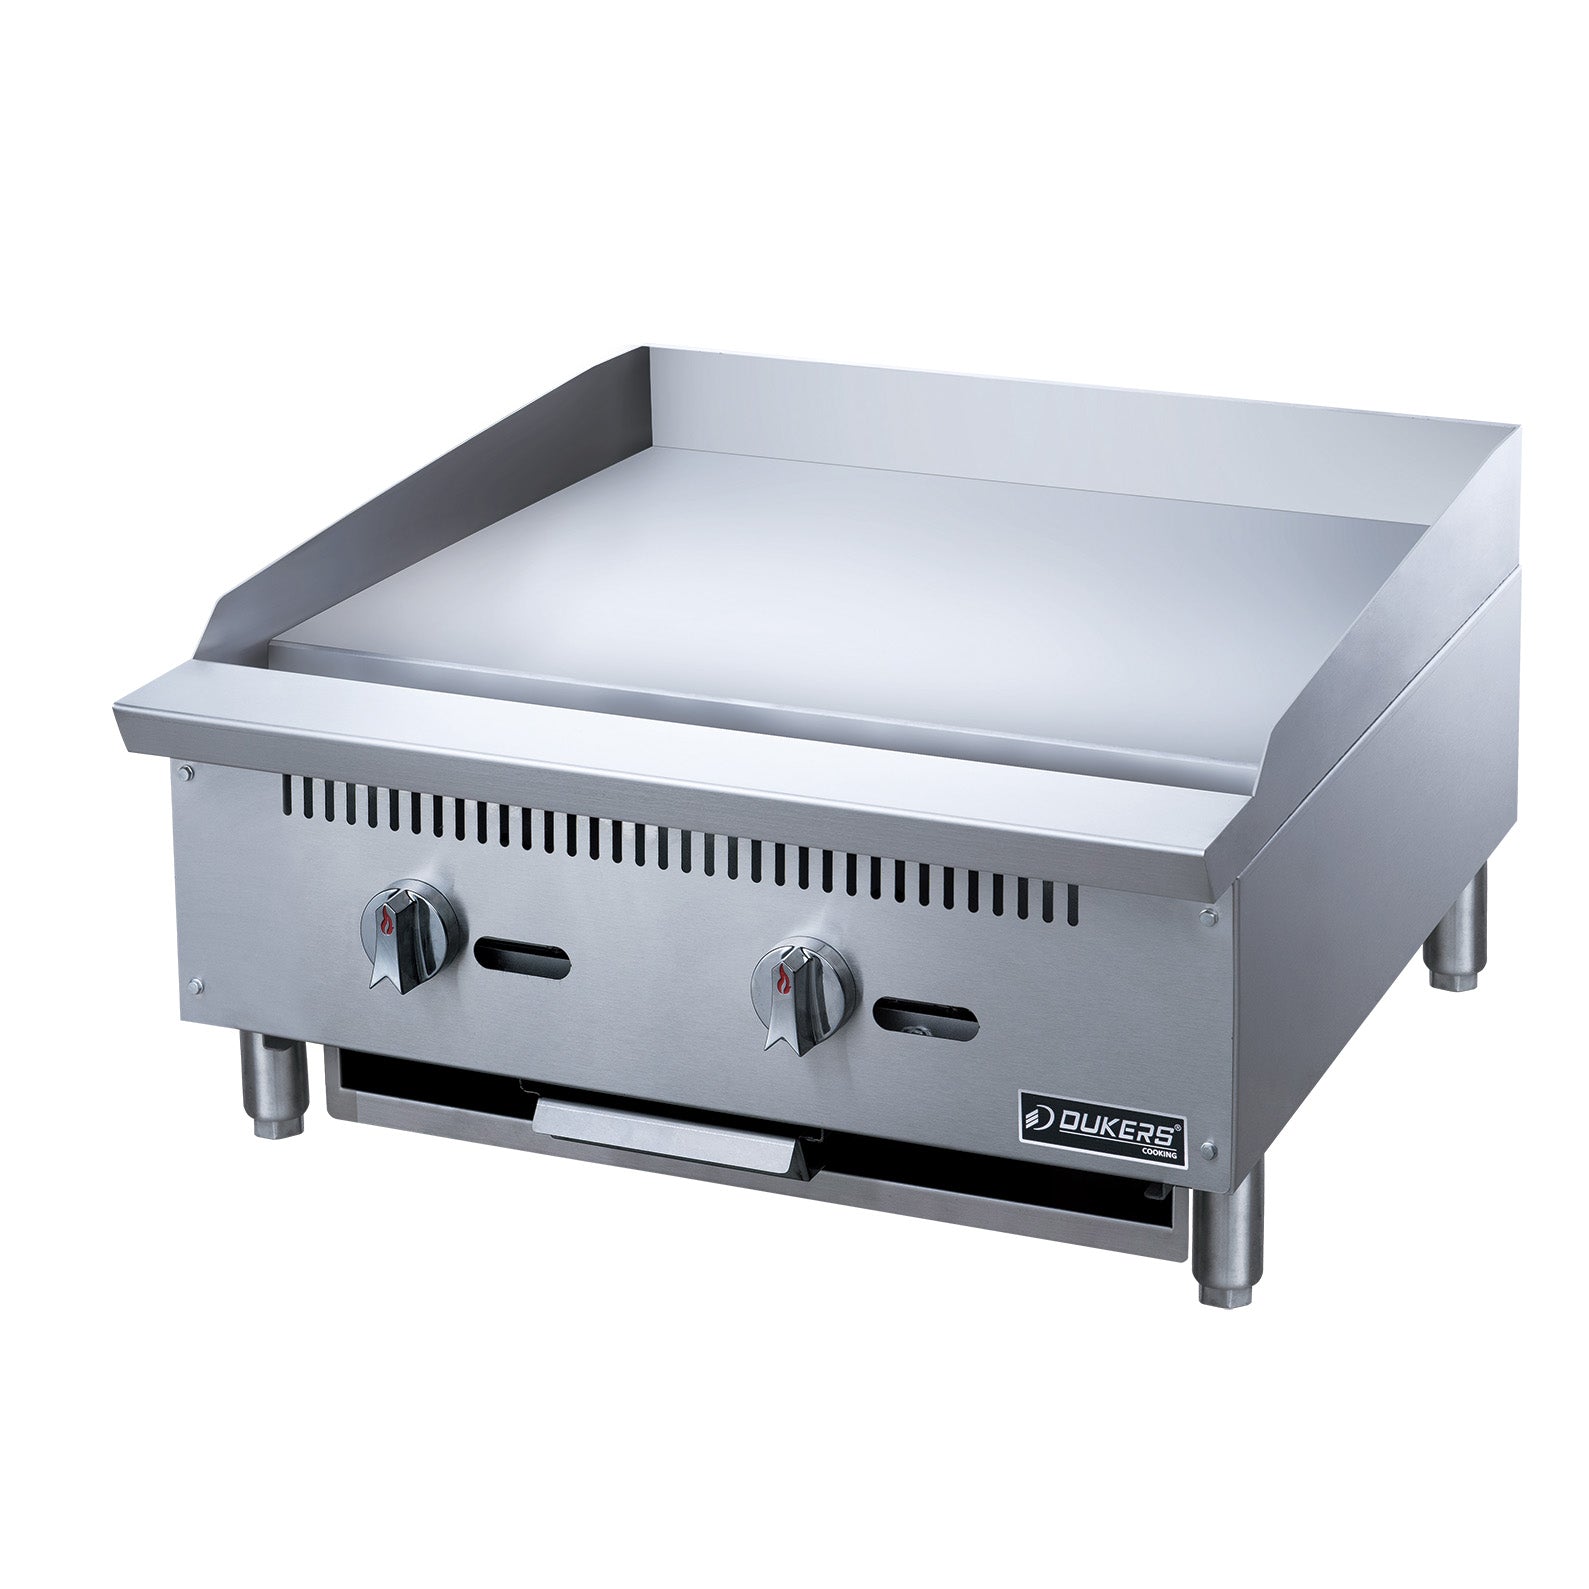 Dukers - DCGM24, Commercial 24" Griddle with 2 Burners